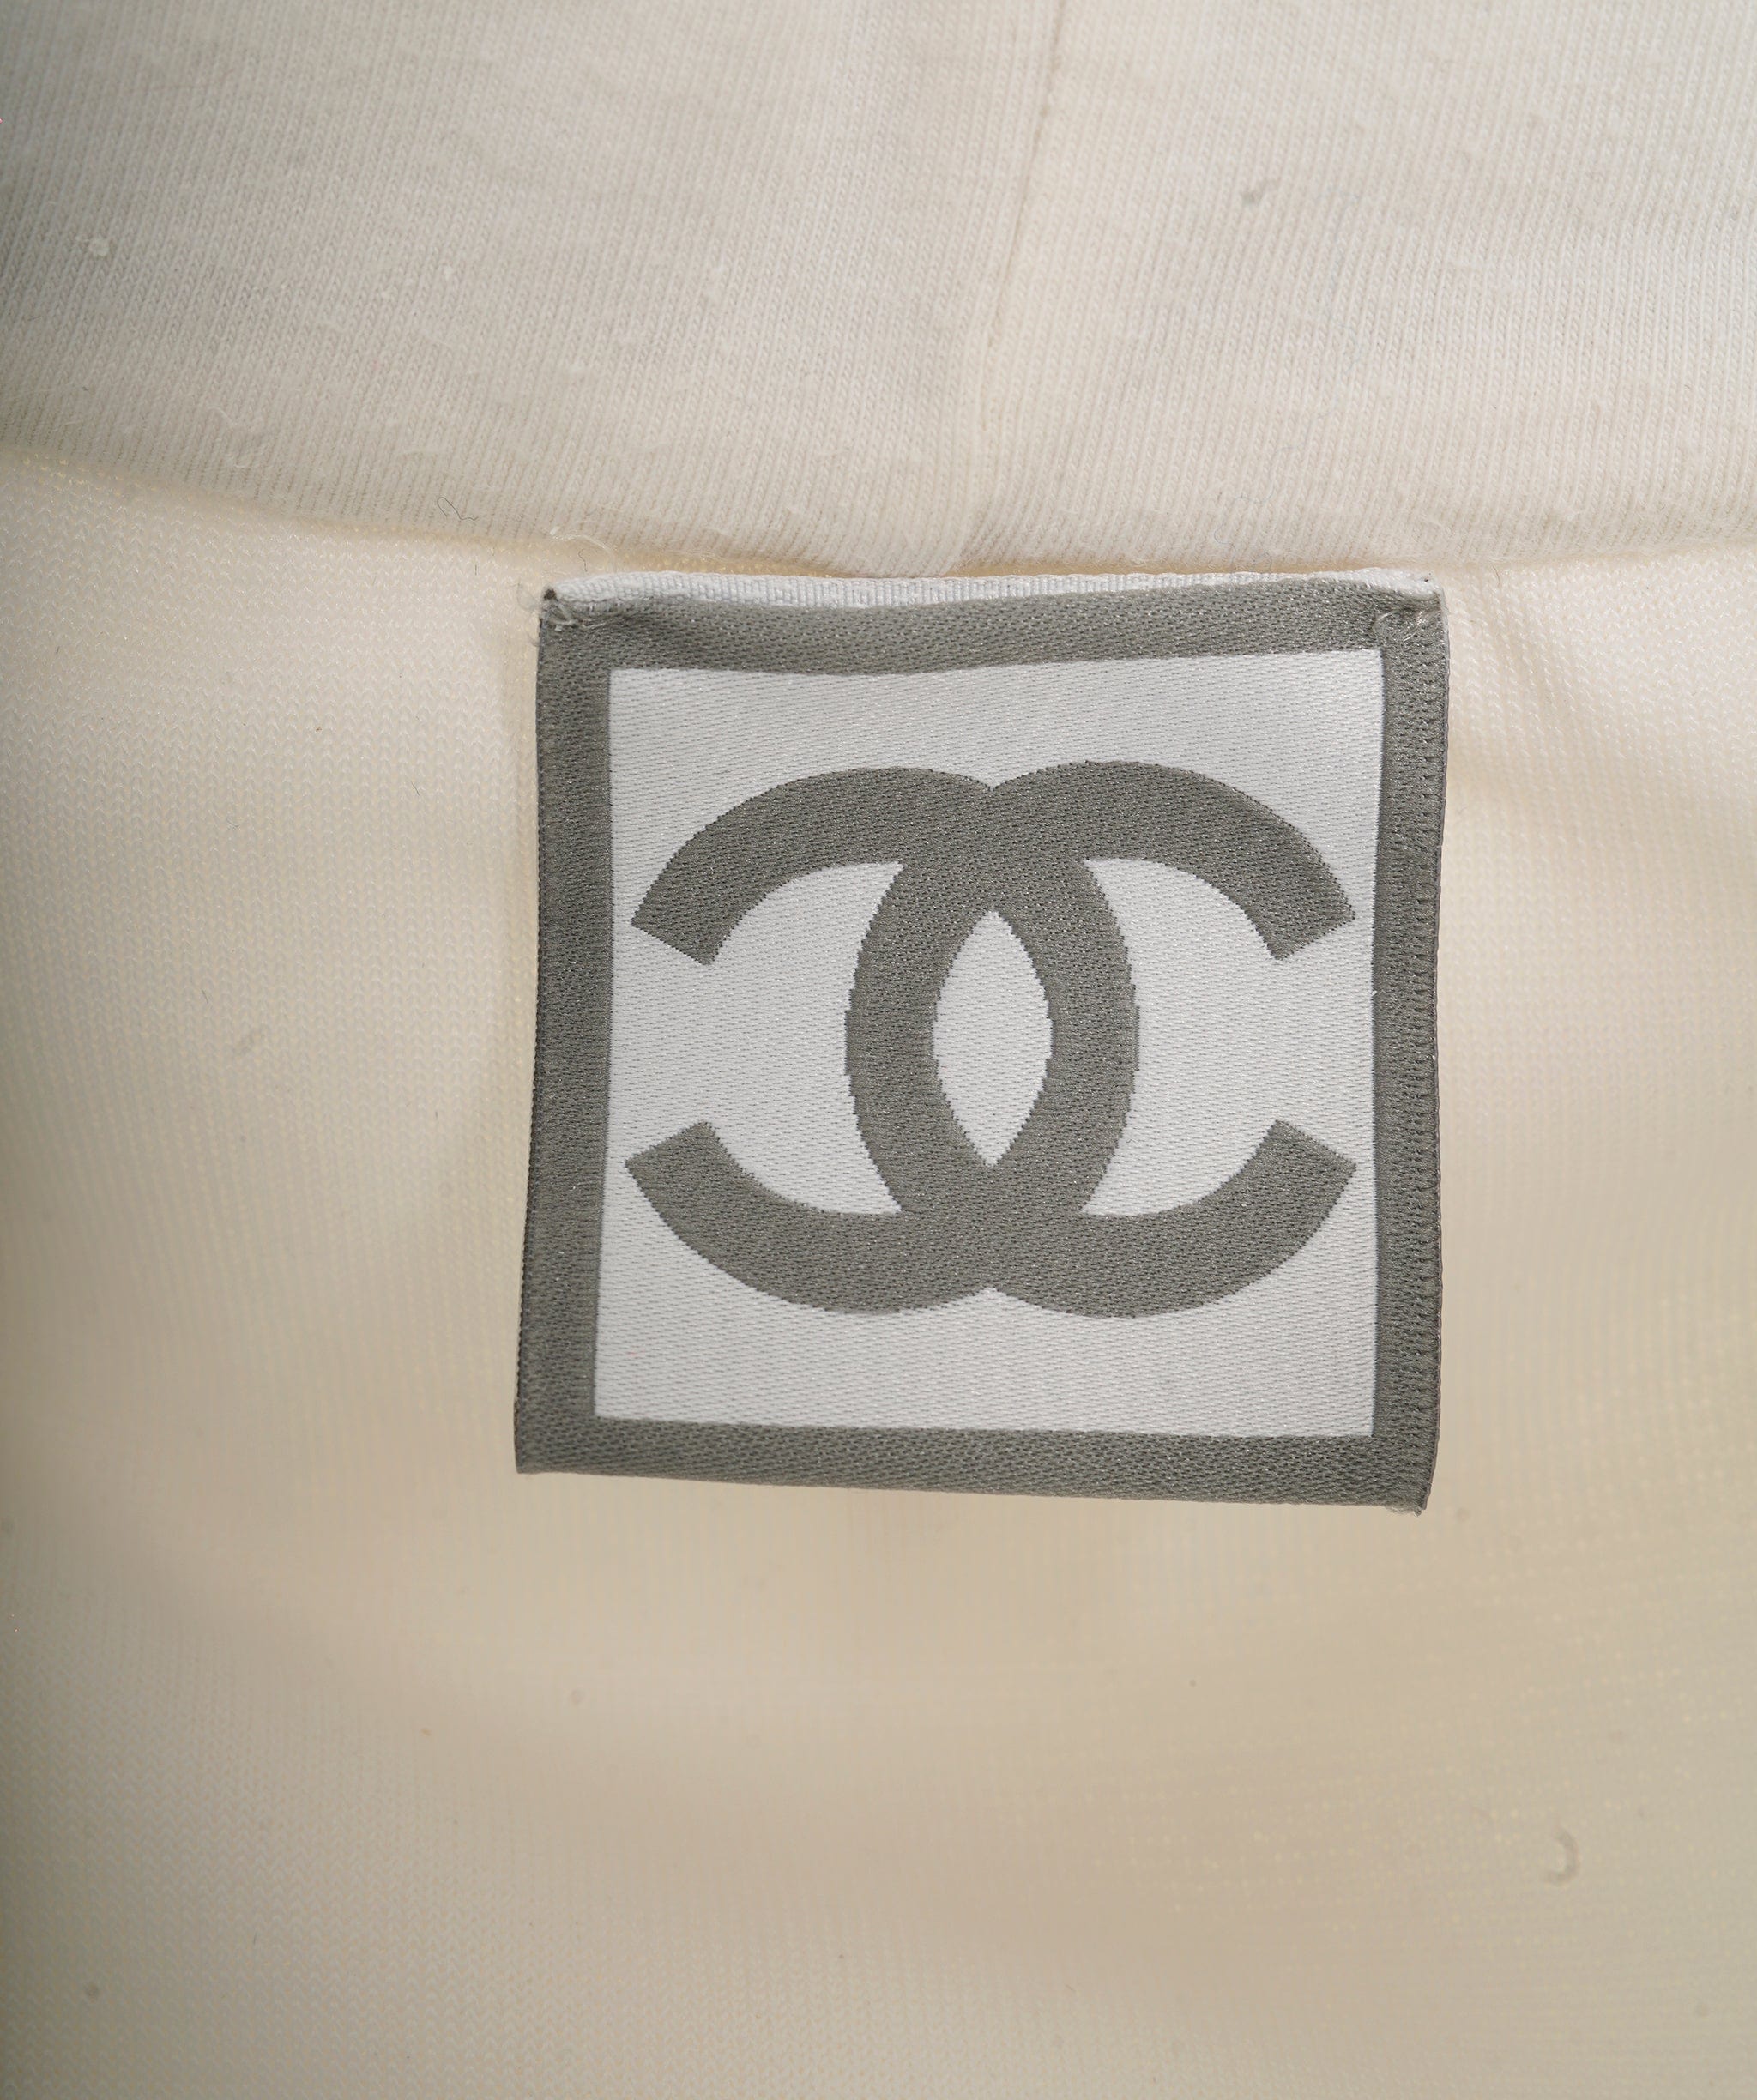 Chanel Chanel 08P Hoodie Jacket White ASL4479